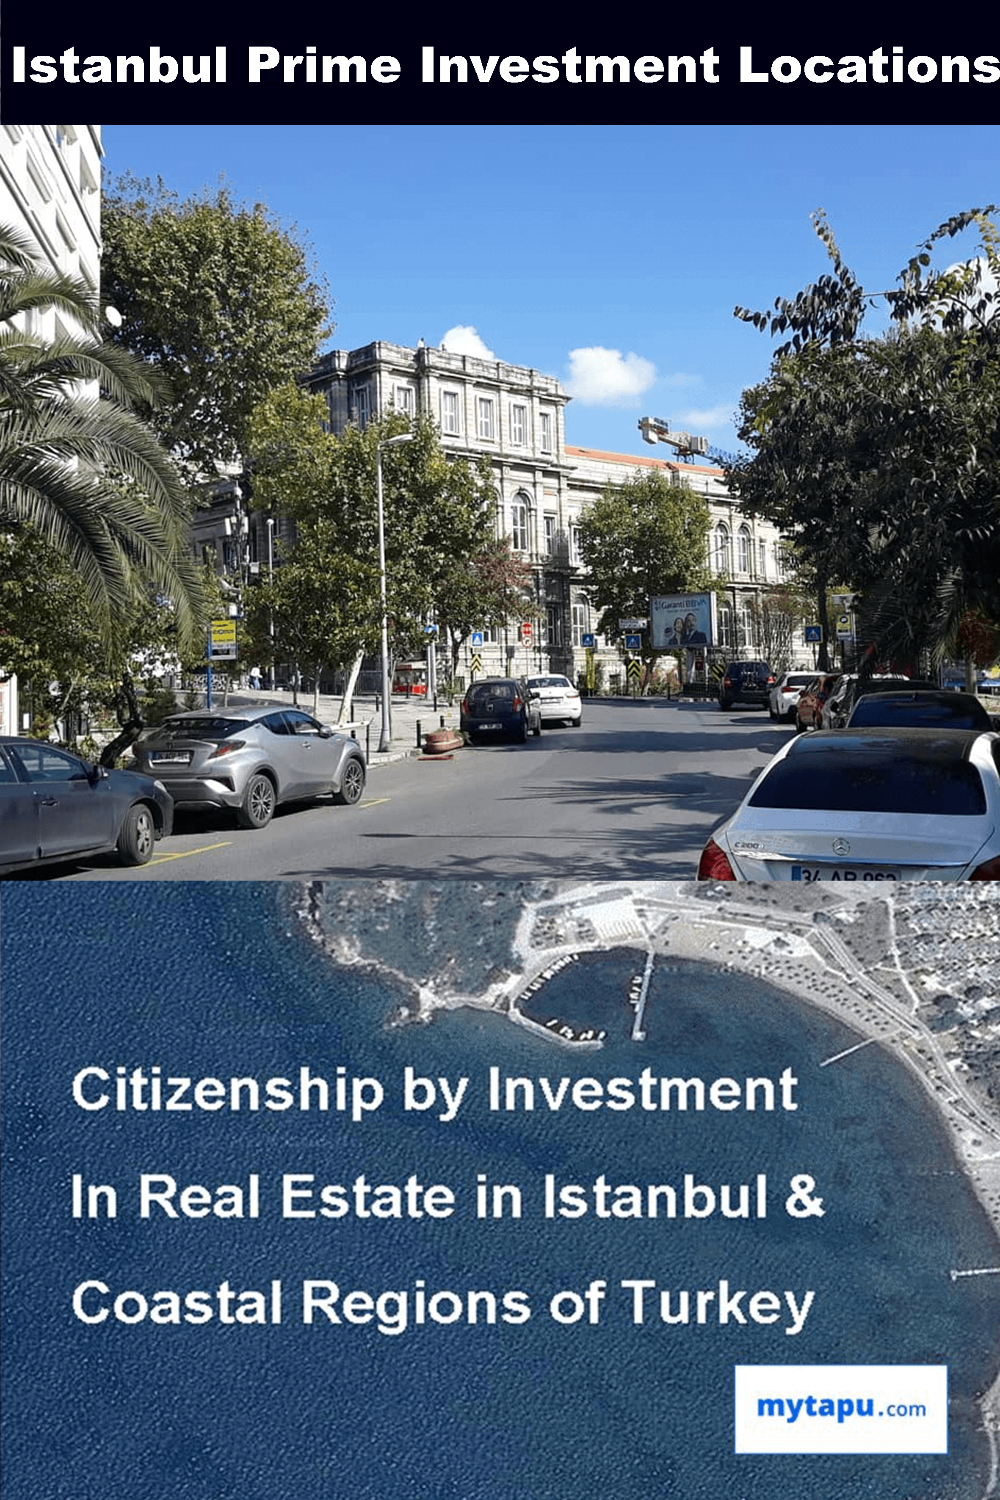 Istanbul's Best Locations are NOT those with New Property Development Projects...